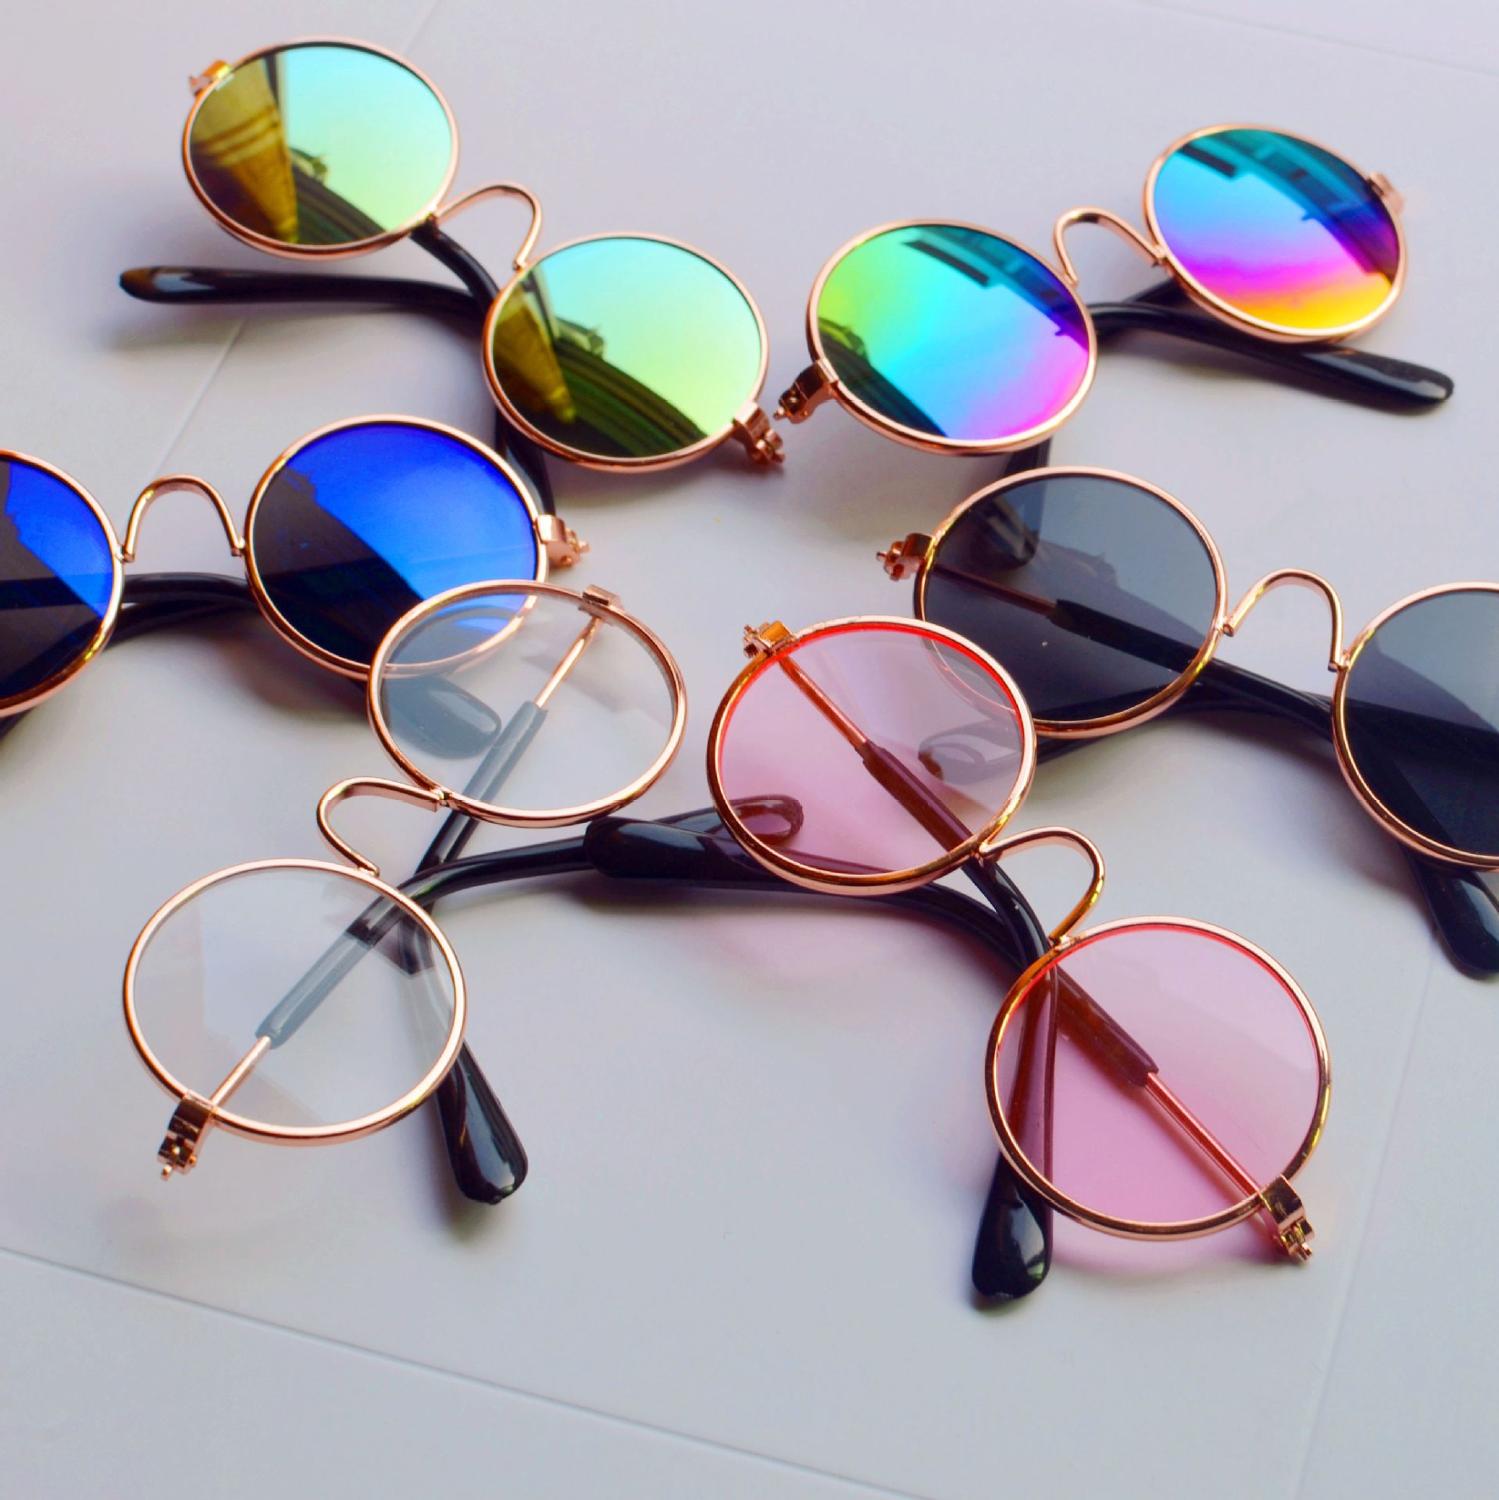 1Pcs Fashion Lovely Glasses Cat Pet Products Sunglasses Eye-wear Protection Small Dog Cat Pet Photos Props Accessories